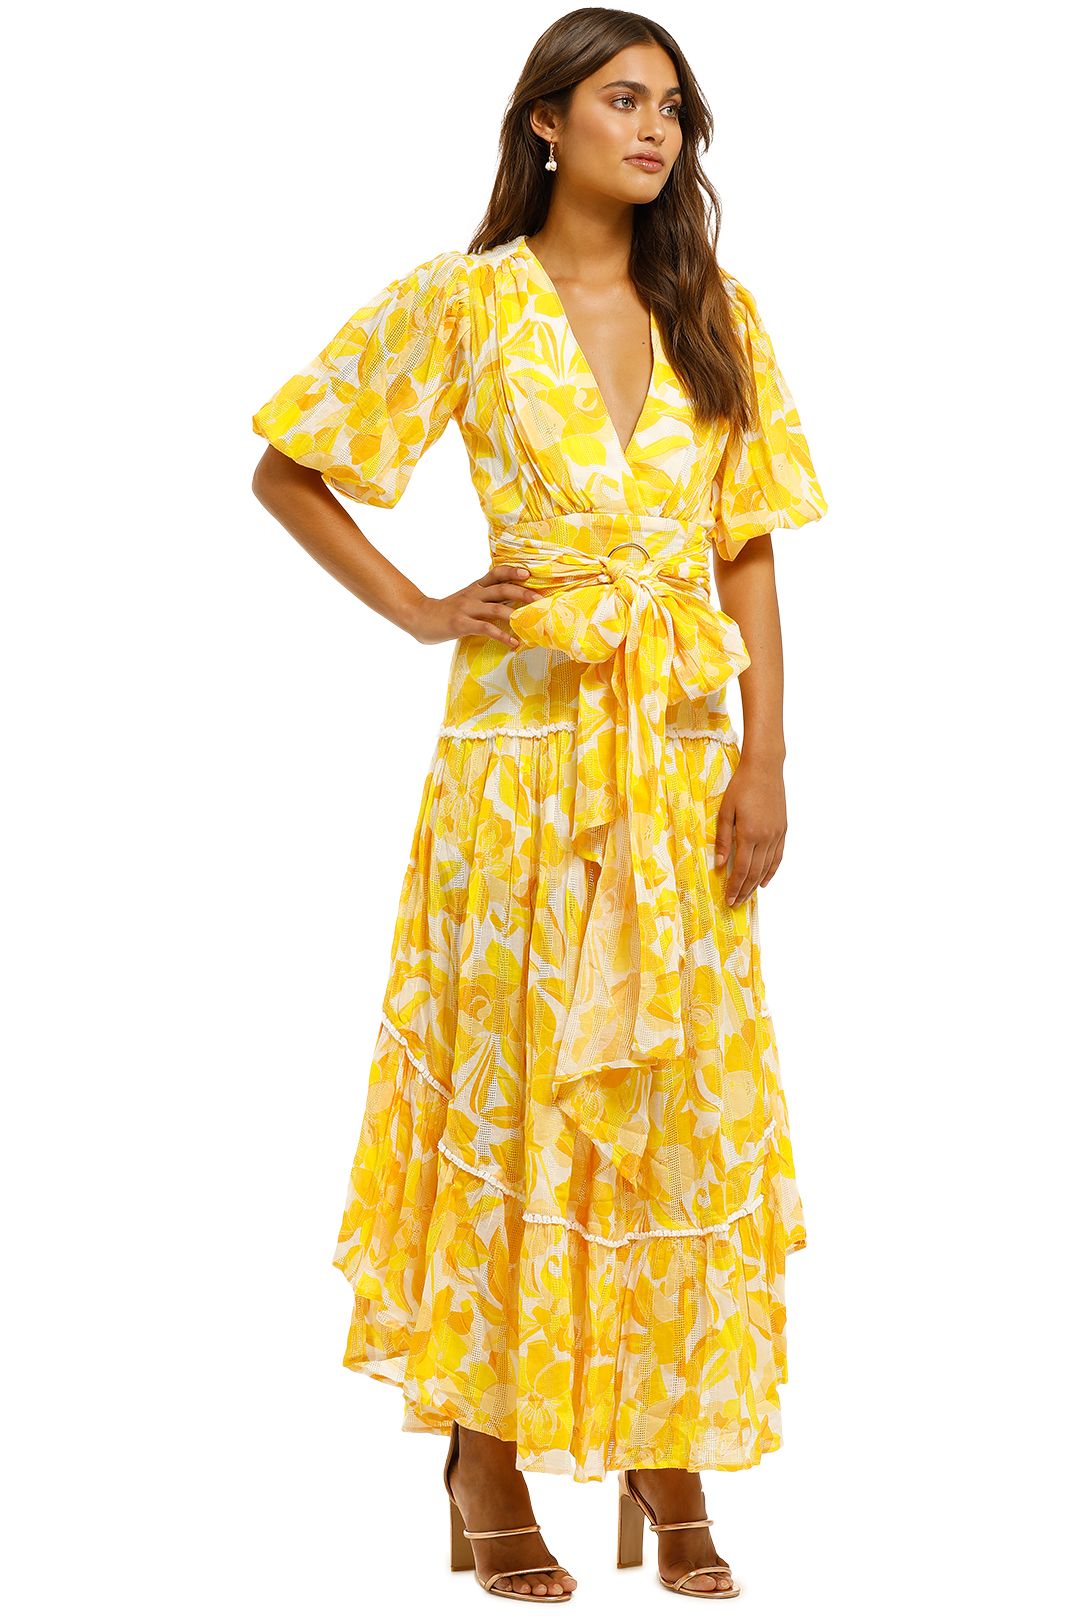 Isla Dress in Golden Floral by Significant Other for Rent | GlamCorner